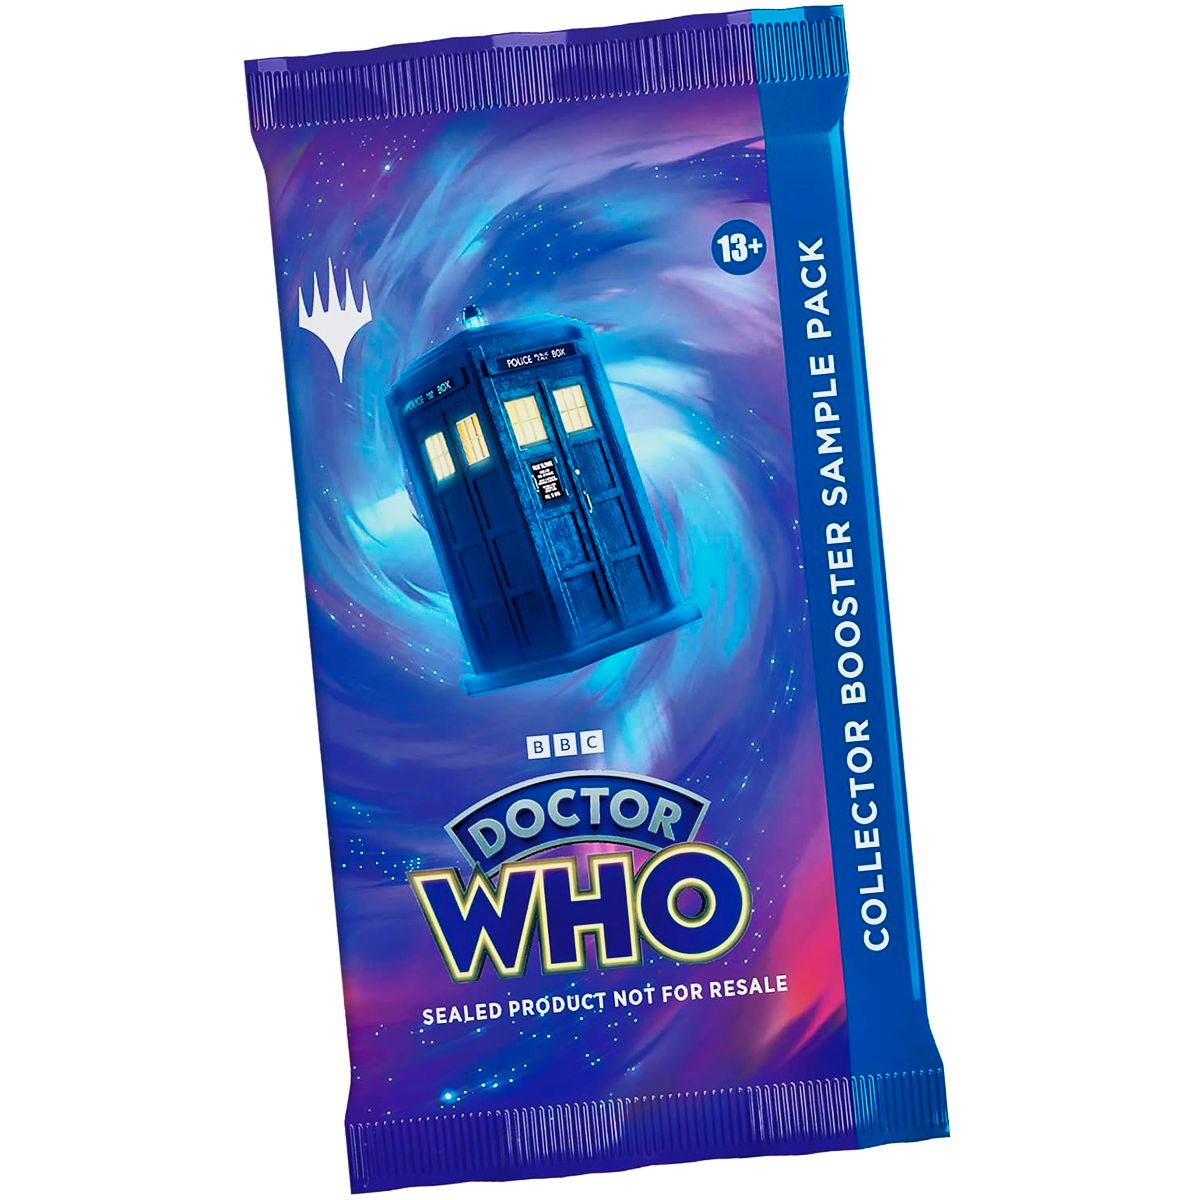 Magic Deck Commander Doctor Who Masters Of Evil Inglês